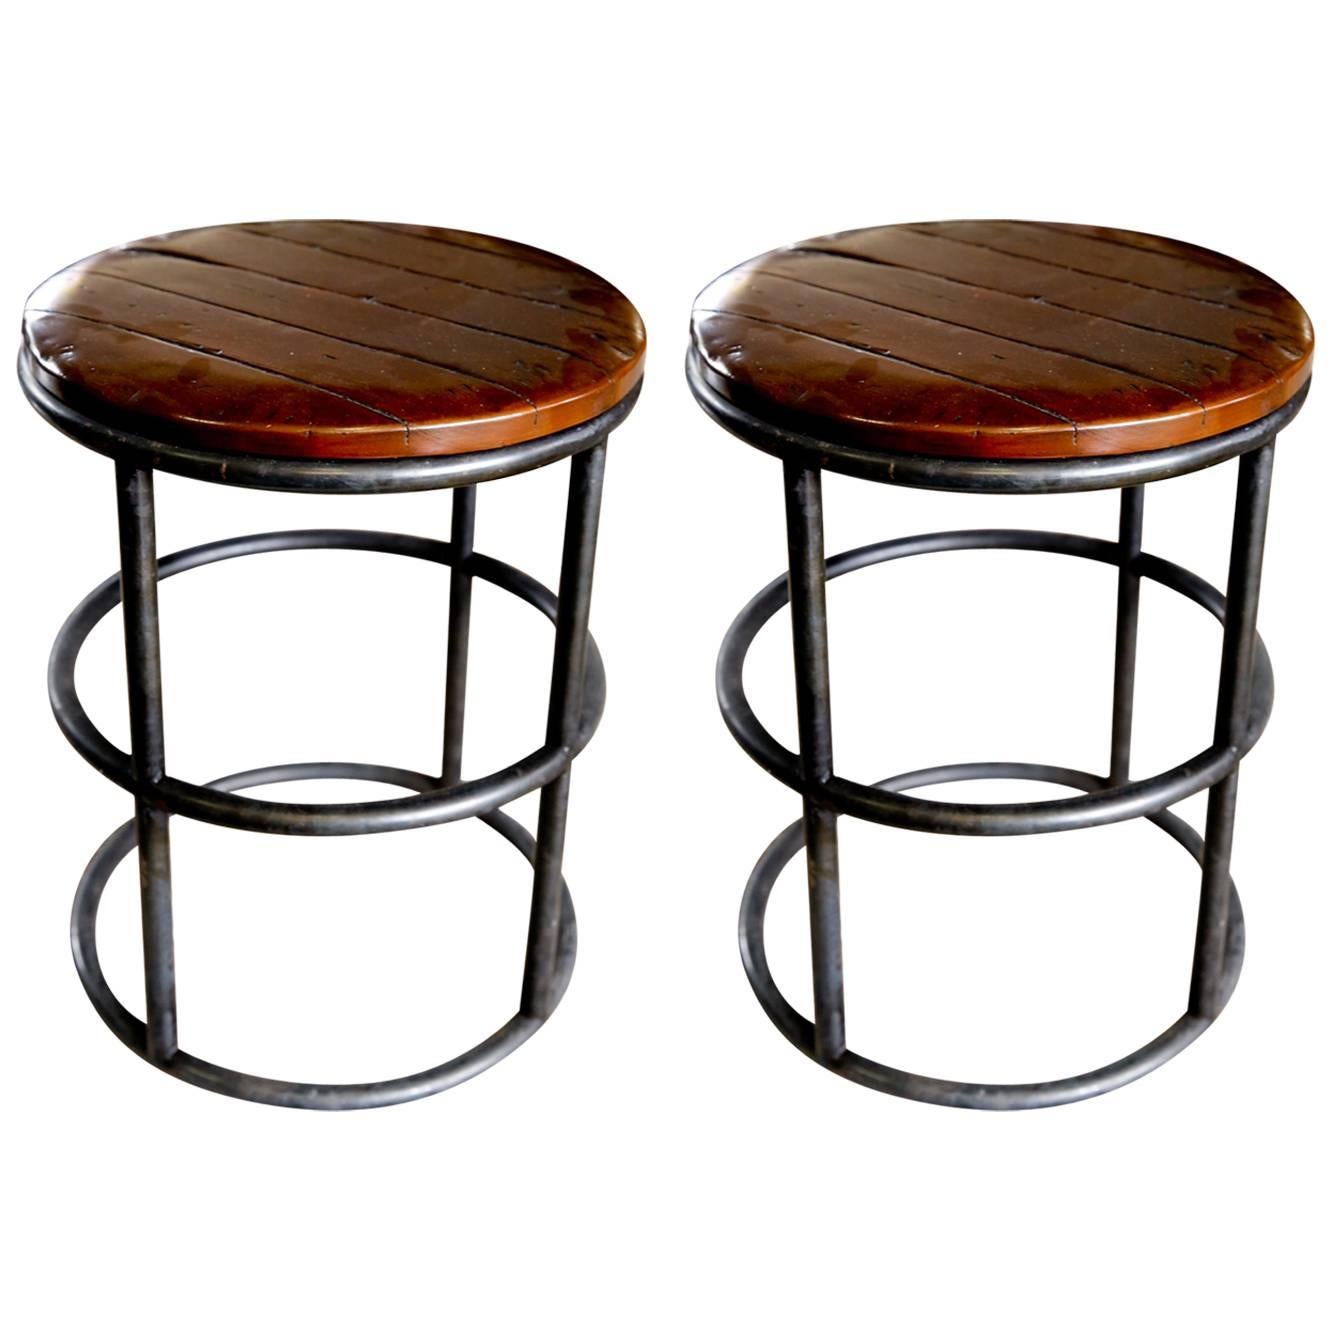 Two Vintage Tubular Metal Stools with Wooden Seats For Sale